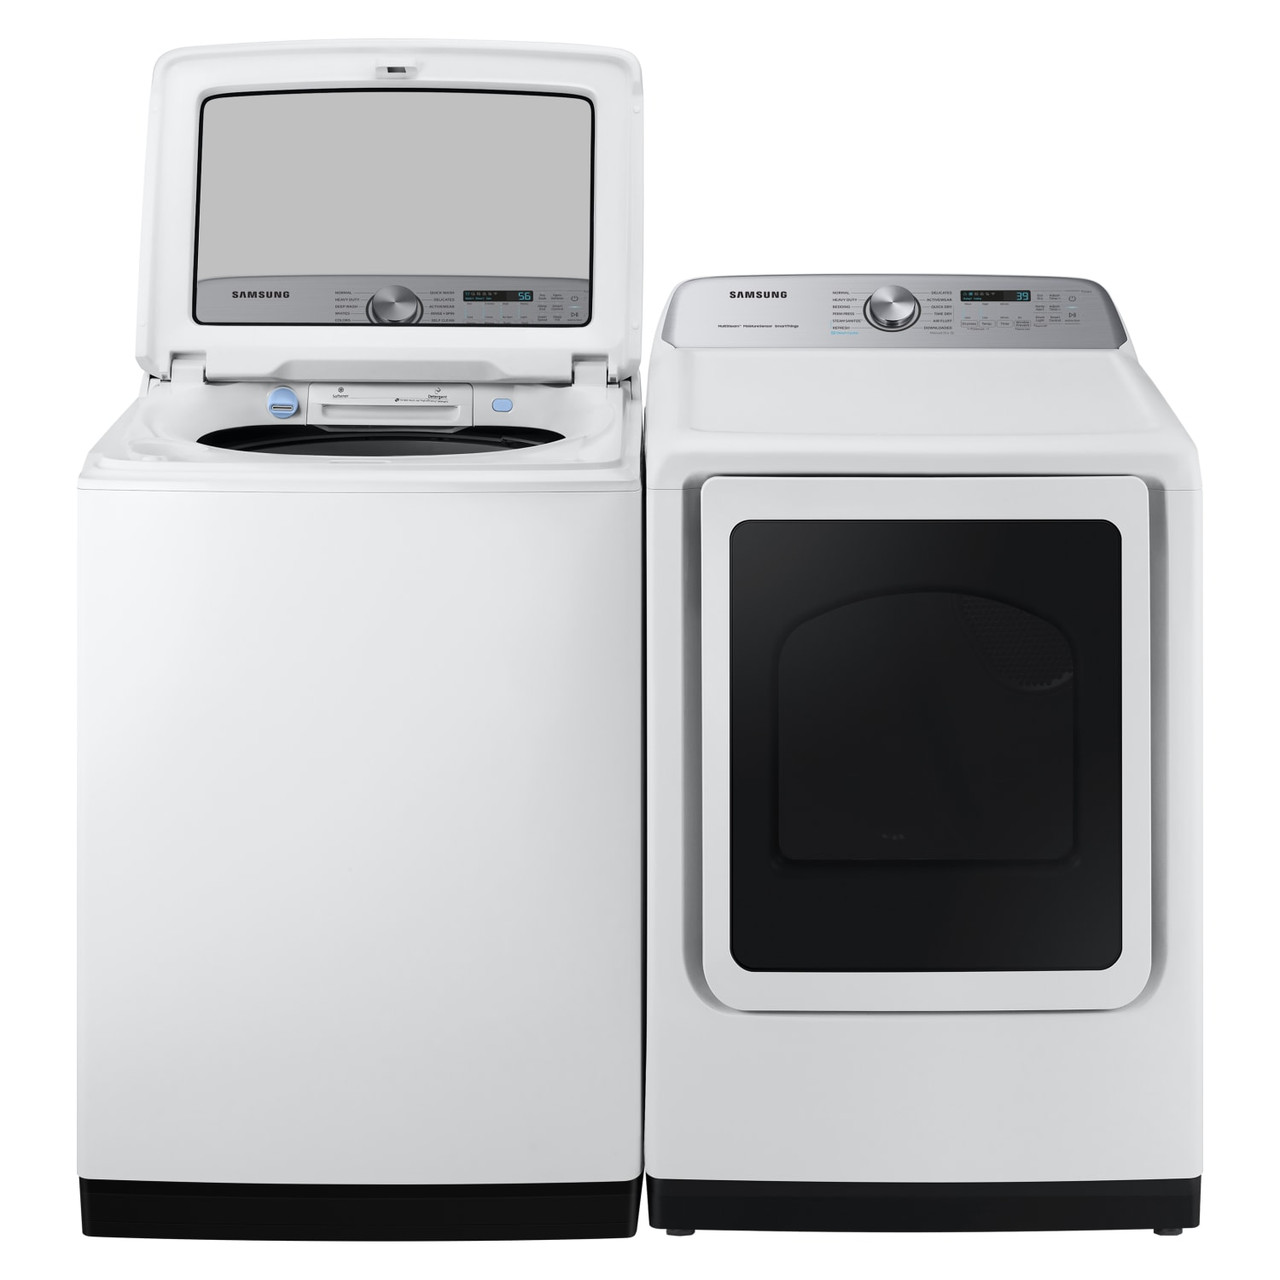 Samsung 7.4 cu. ft. Smart Electric Dryer with Steam Sanitize+ - DVE52A5500W